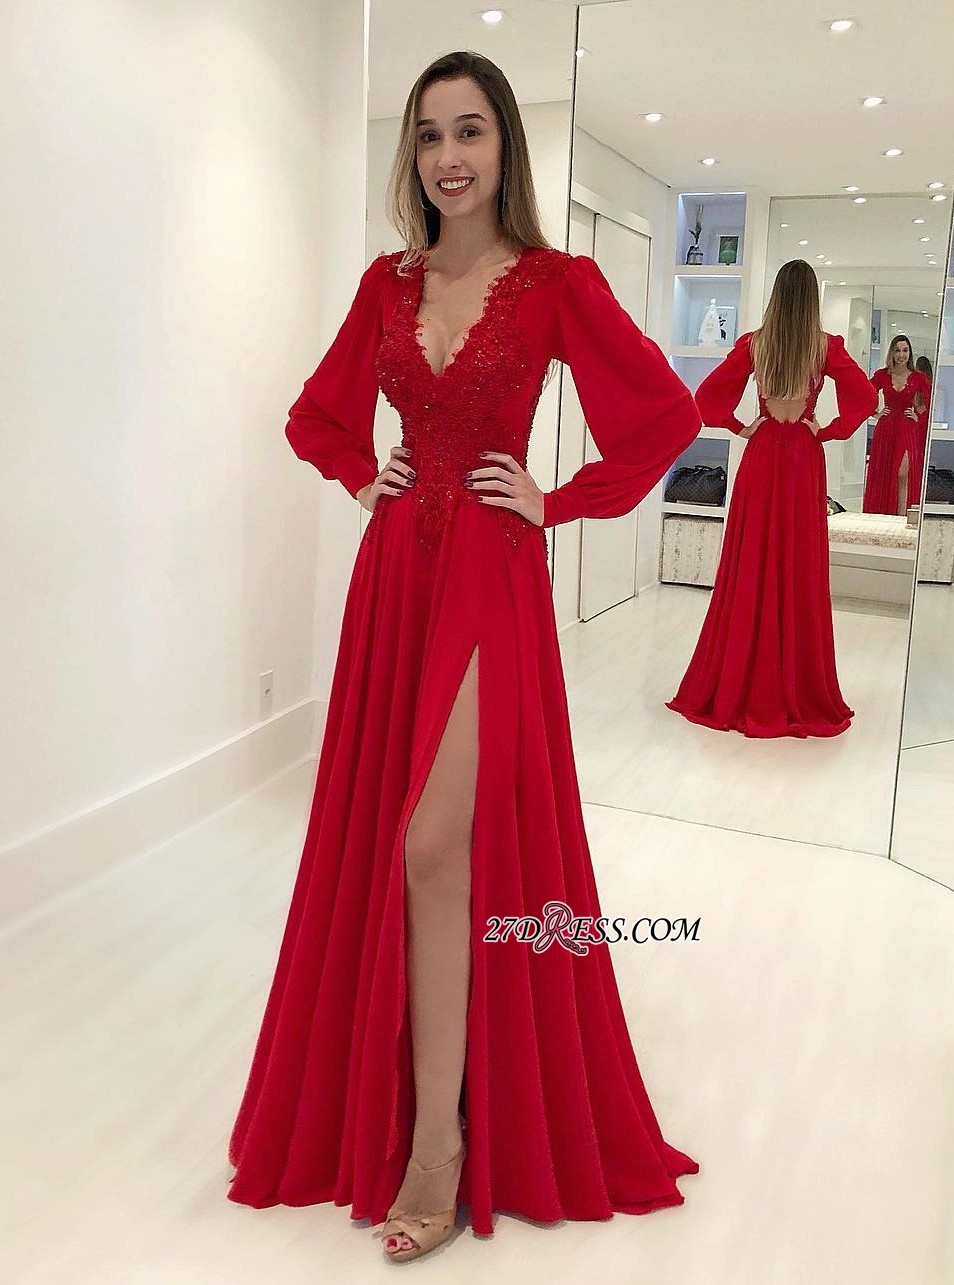 

Robes de Soiree Red Prom Dresses Long Sleeve Split Evening Gowns Backless Cocktail Party Dress Lace Formal Gown Vestidos de Fiesta, Gray